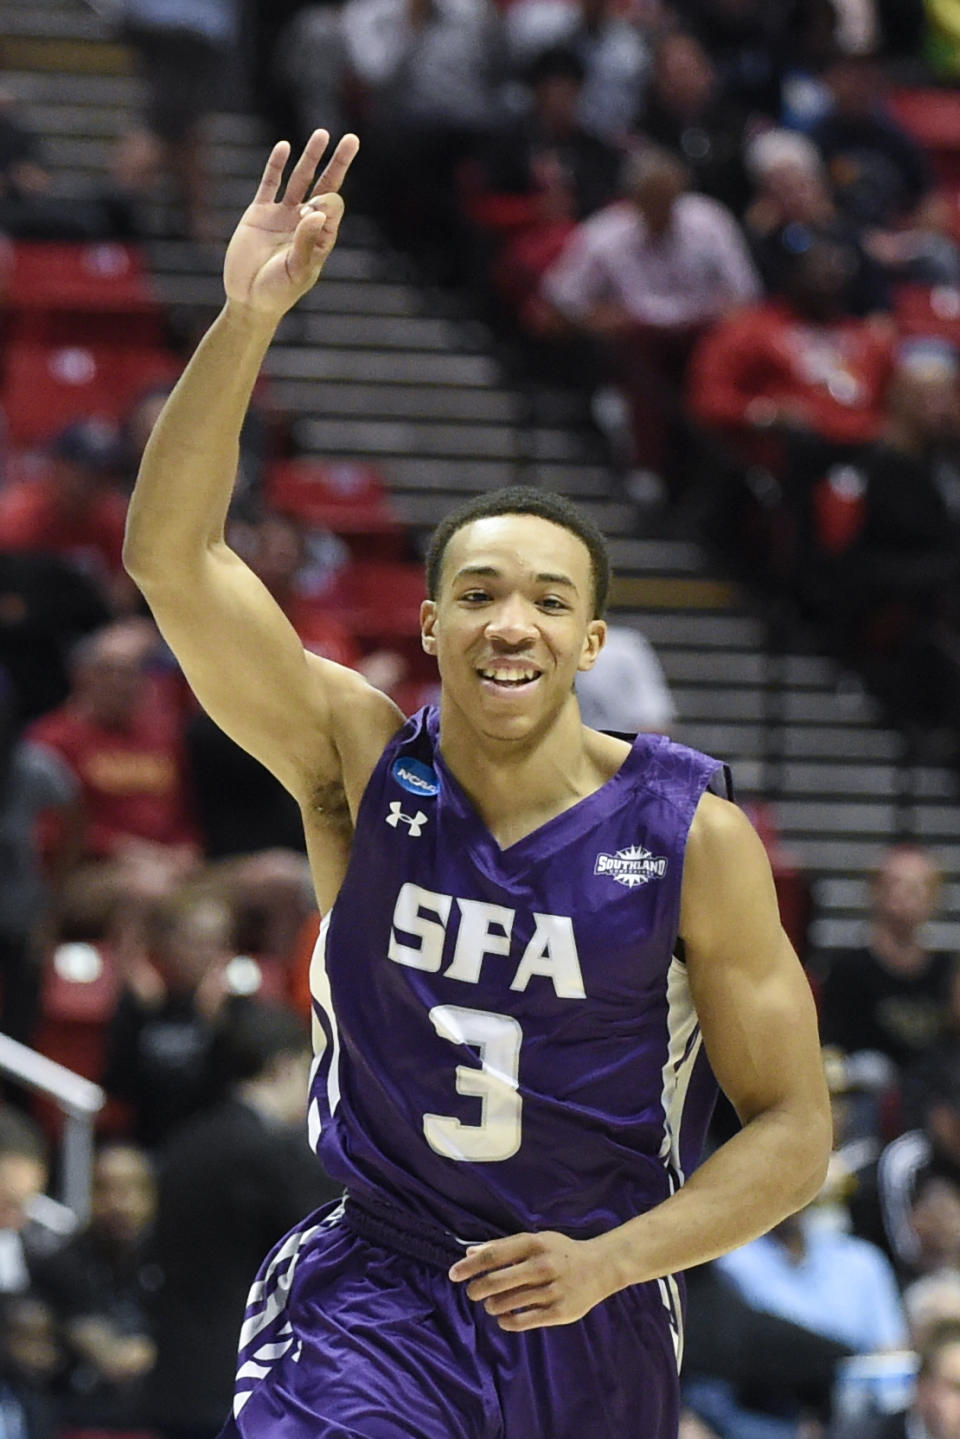 Stephen F. Austin guard Deshaunt Walker gestures while playing Virginia Commonwealth during the first half of a second-round game in the NCAA college basketball tournament Friday, March 21, 2014, in San Diego. (AP Photo/Denis Poroy)